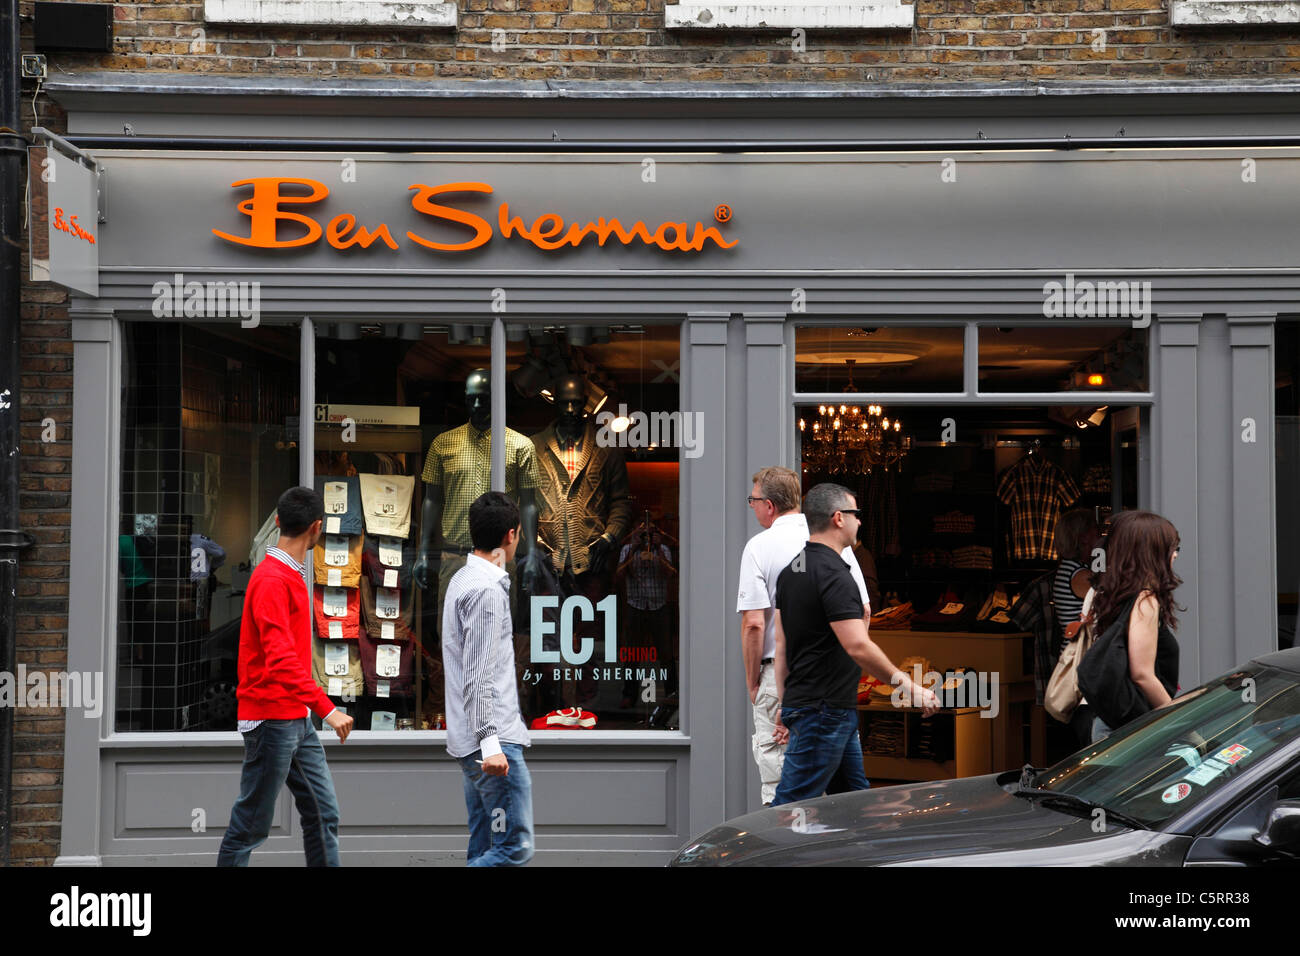 Ben sherman hi-res stock photography and images - Alamy